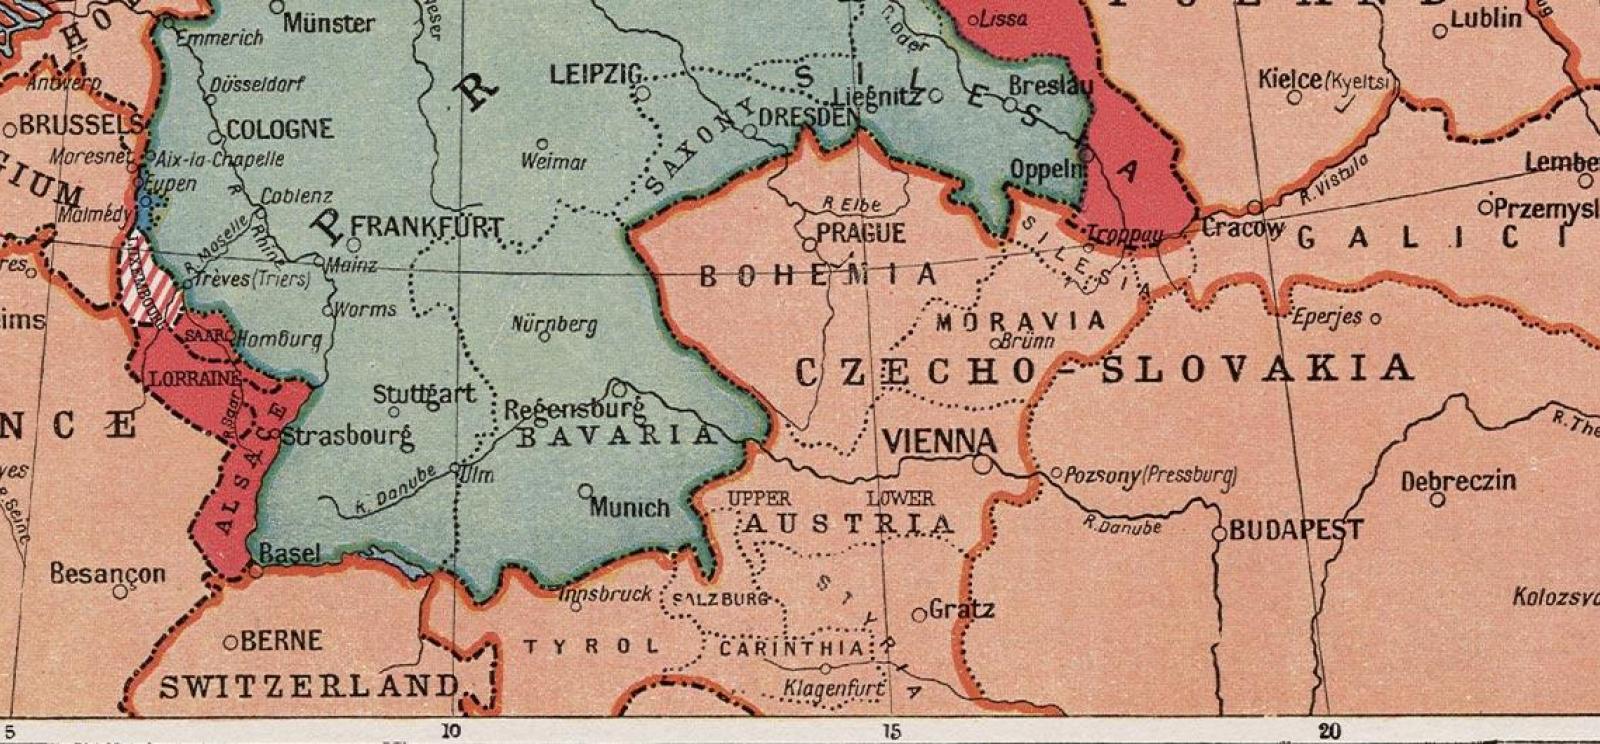 Scan of an old map of the southern part of Germany, Czechoslovakia, Austria and surrounds.